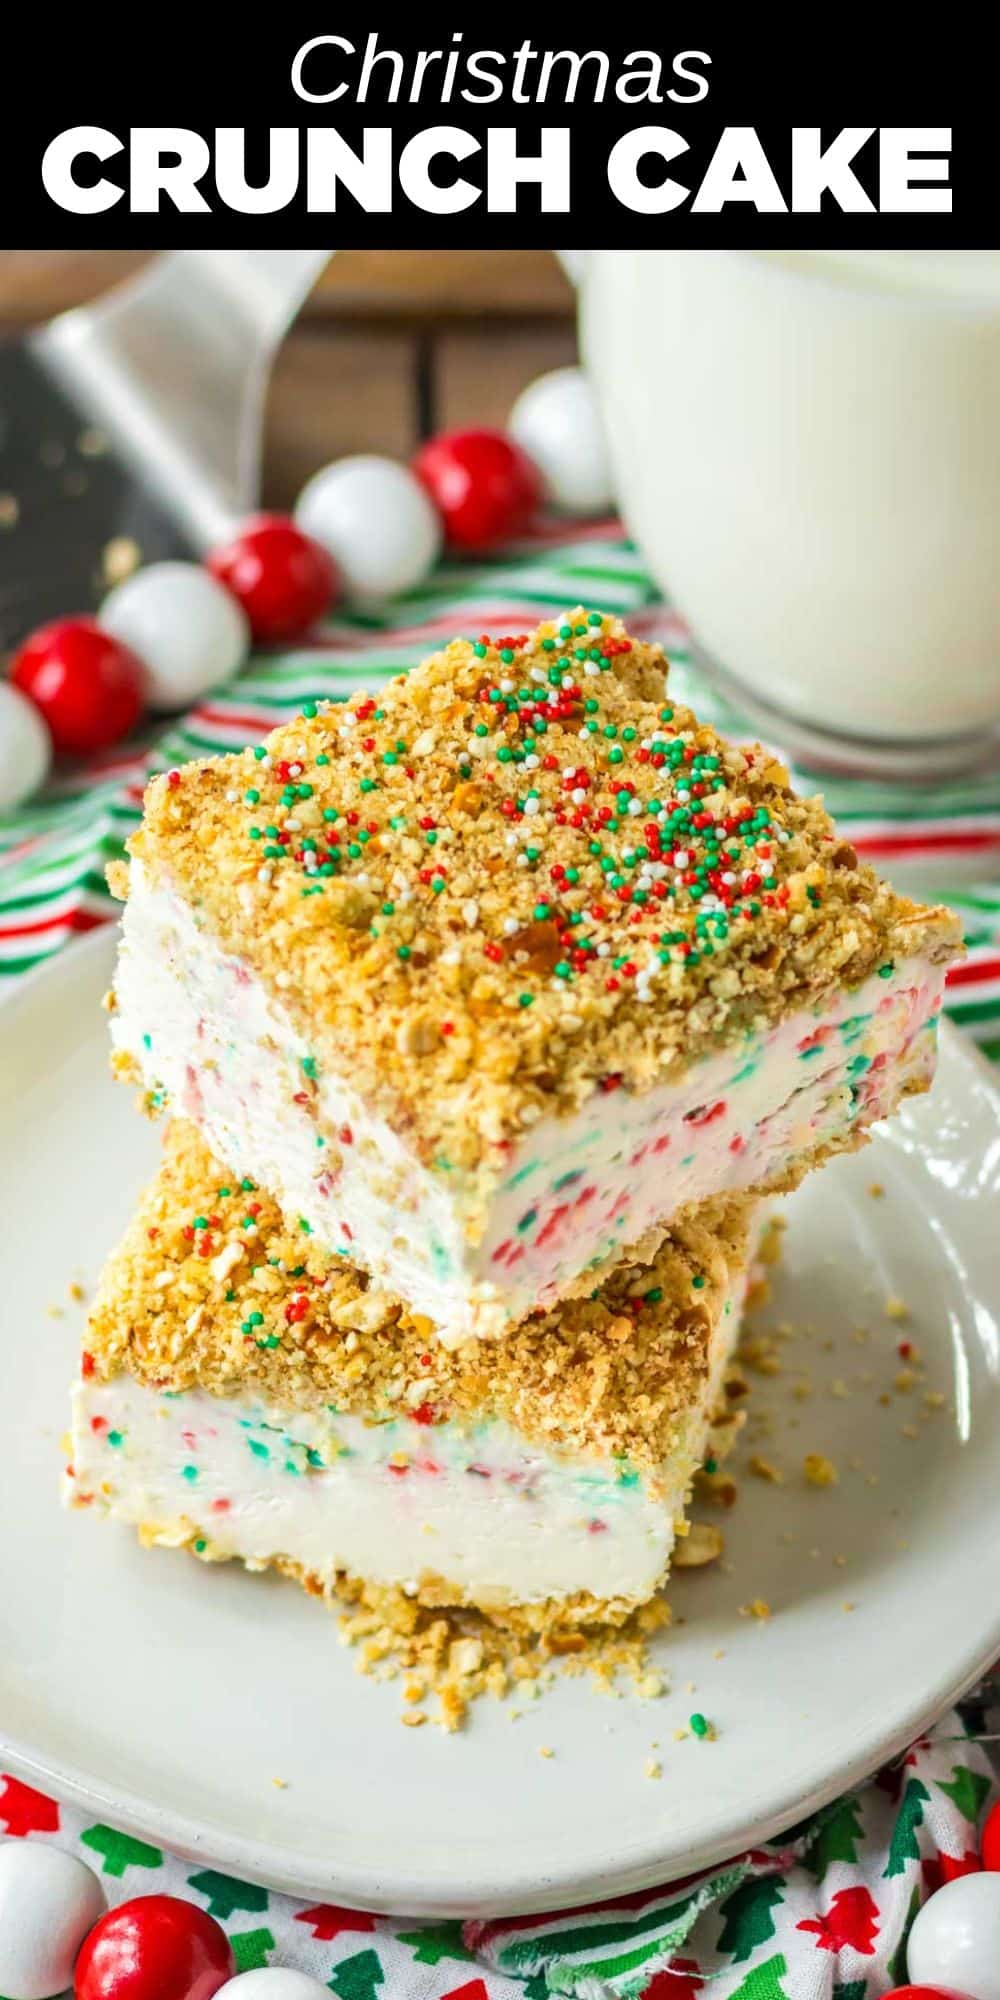 This Christmas Crunch Cake is an easy yet impressive dessert that’s ideal for the holiday season. Part creamy cheesecake, part frosty frozen dessert, this festive treat is sure to get everyone in the holiday spirit.